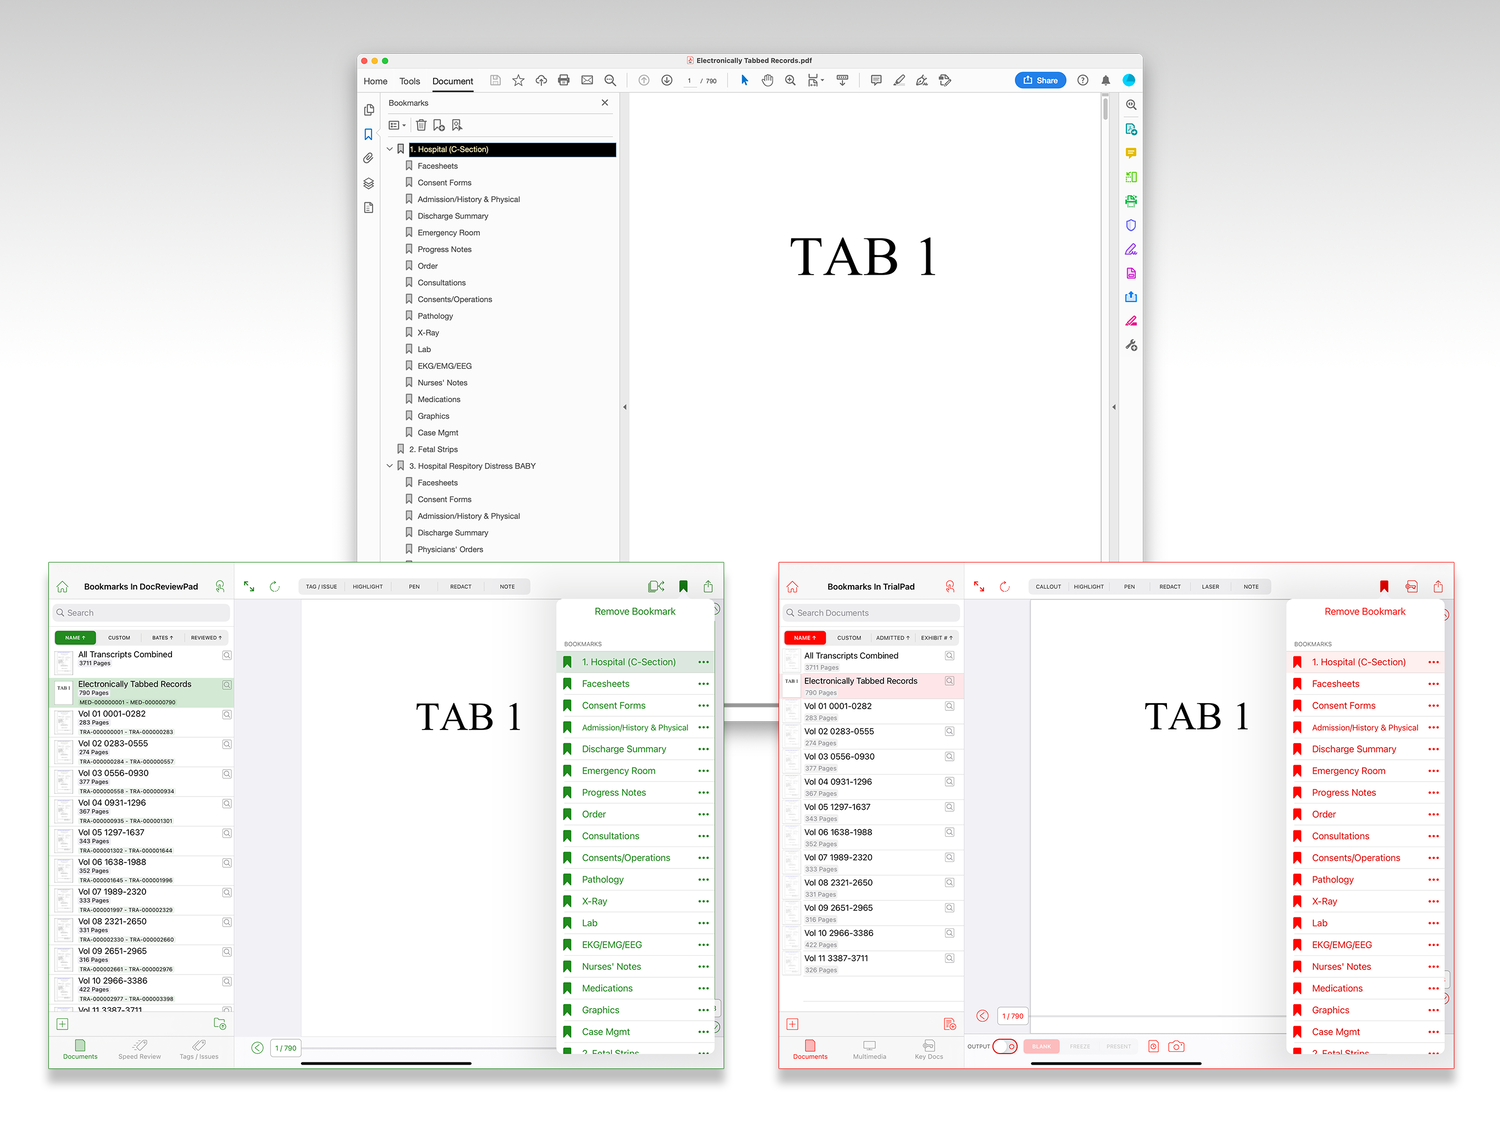 Bookmarks now persist in the LIT SUITE apps, and can be imported from or exported to Adobe Acrobat!